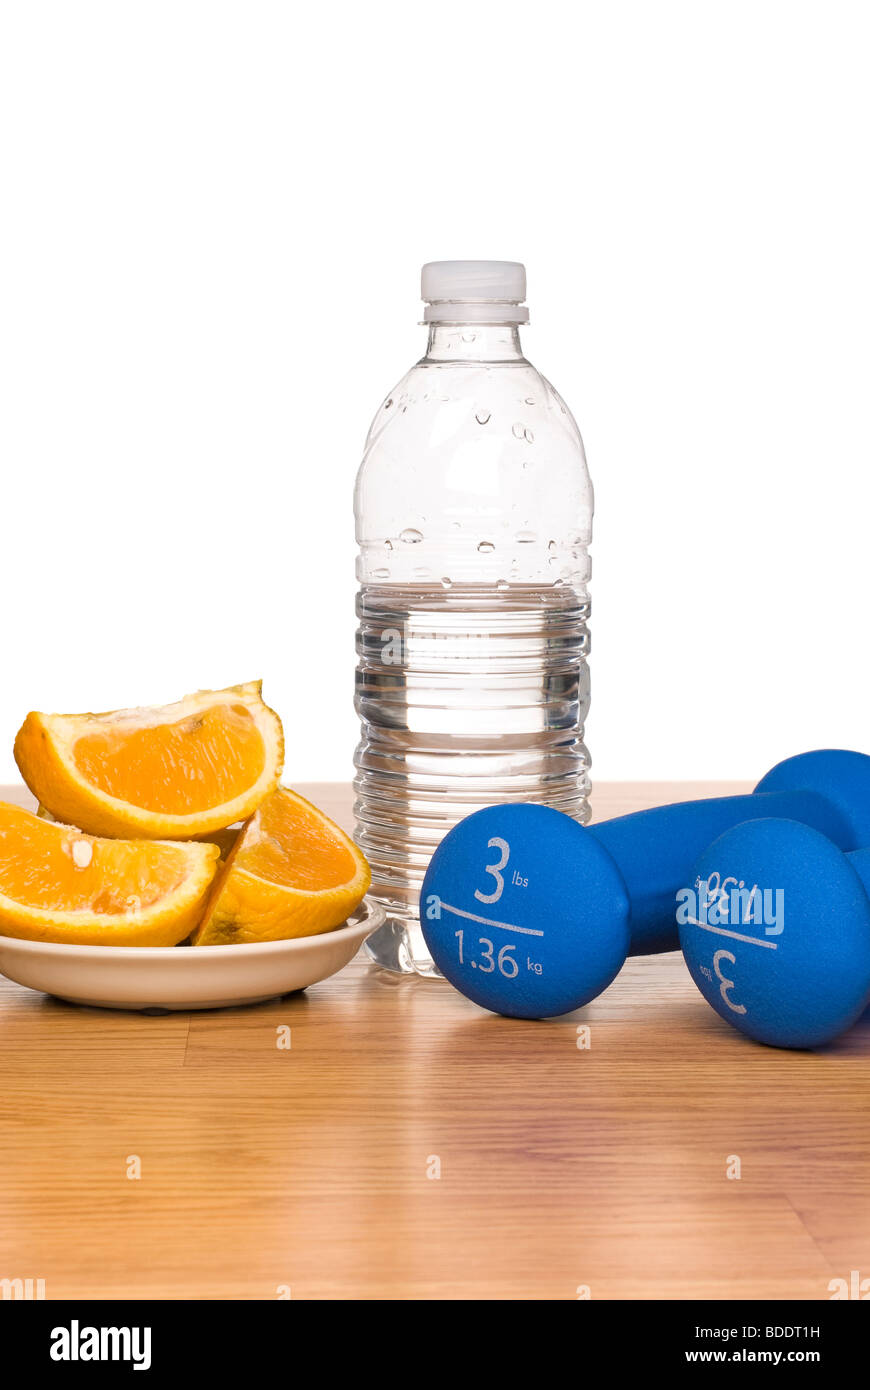 A conceptual image of healthy living including exercise equipment, a bottle of water and a sliced orange. Stock Photo